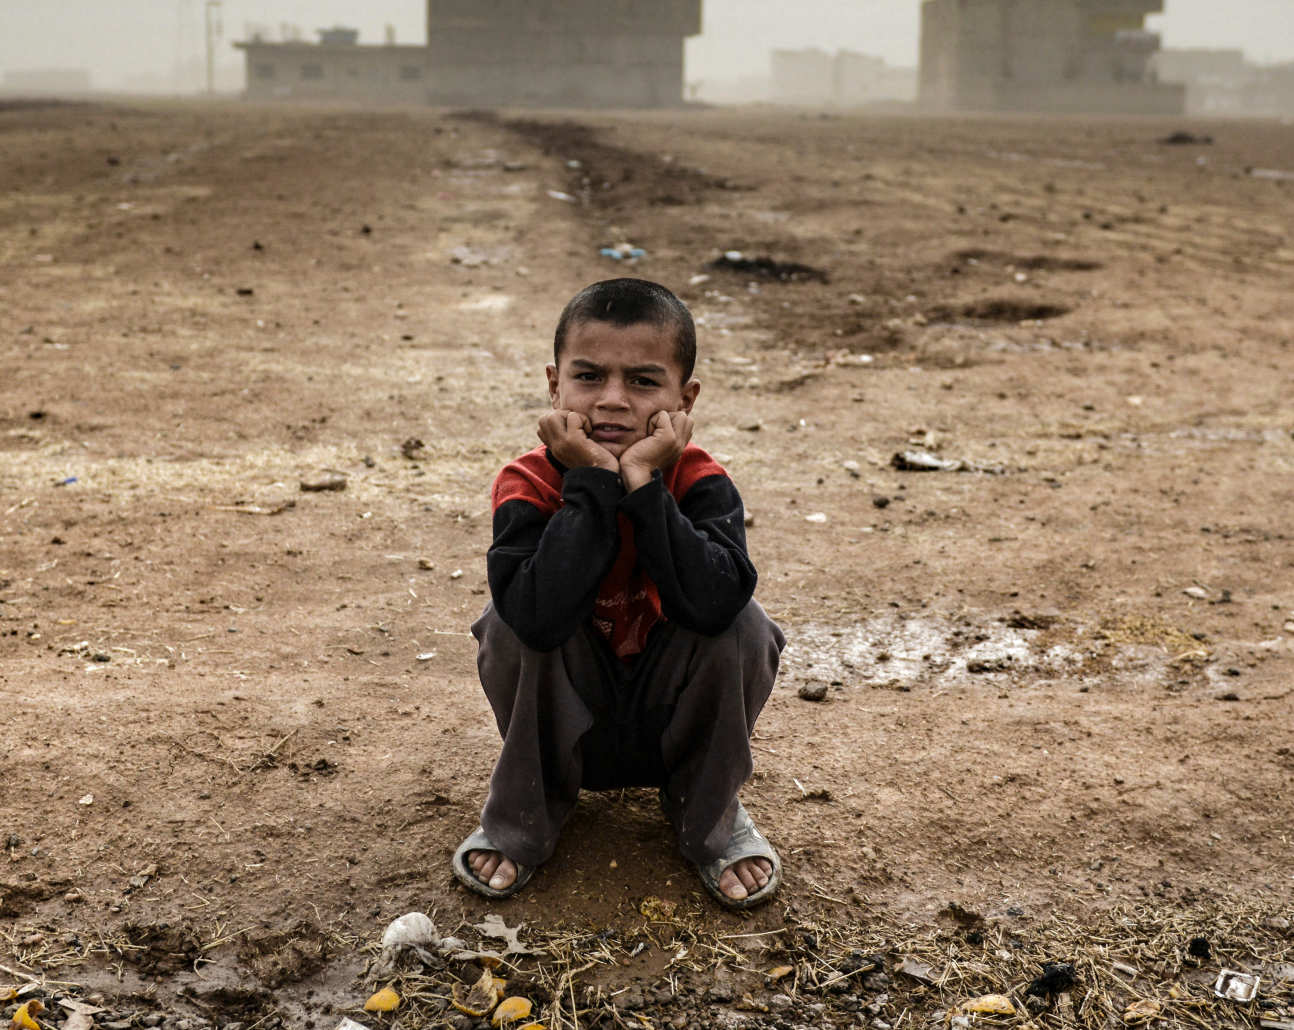 A young boy sitting in a mine field